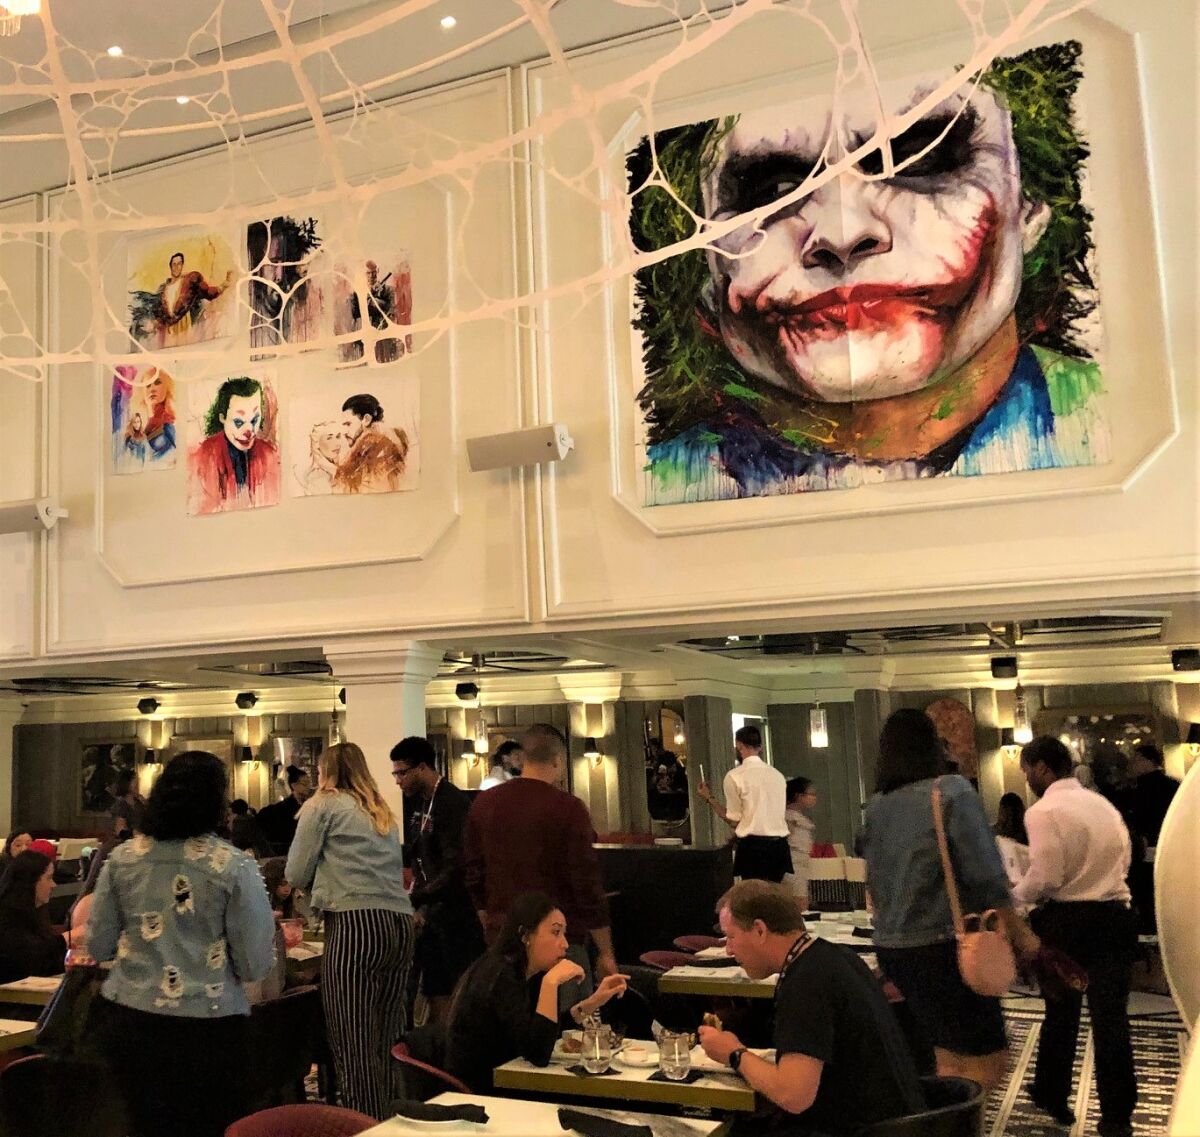 Many downtown businesses have gotten into the spirit of Comic-Con. The Joker surveys a crowd of diners at the Sugar Factory American Brasserie on the ground floor of the Theatre Box, where some private Comic-Con screenings and parties were scheduled.